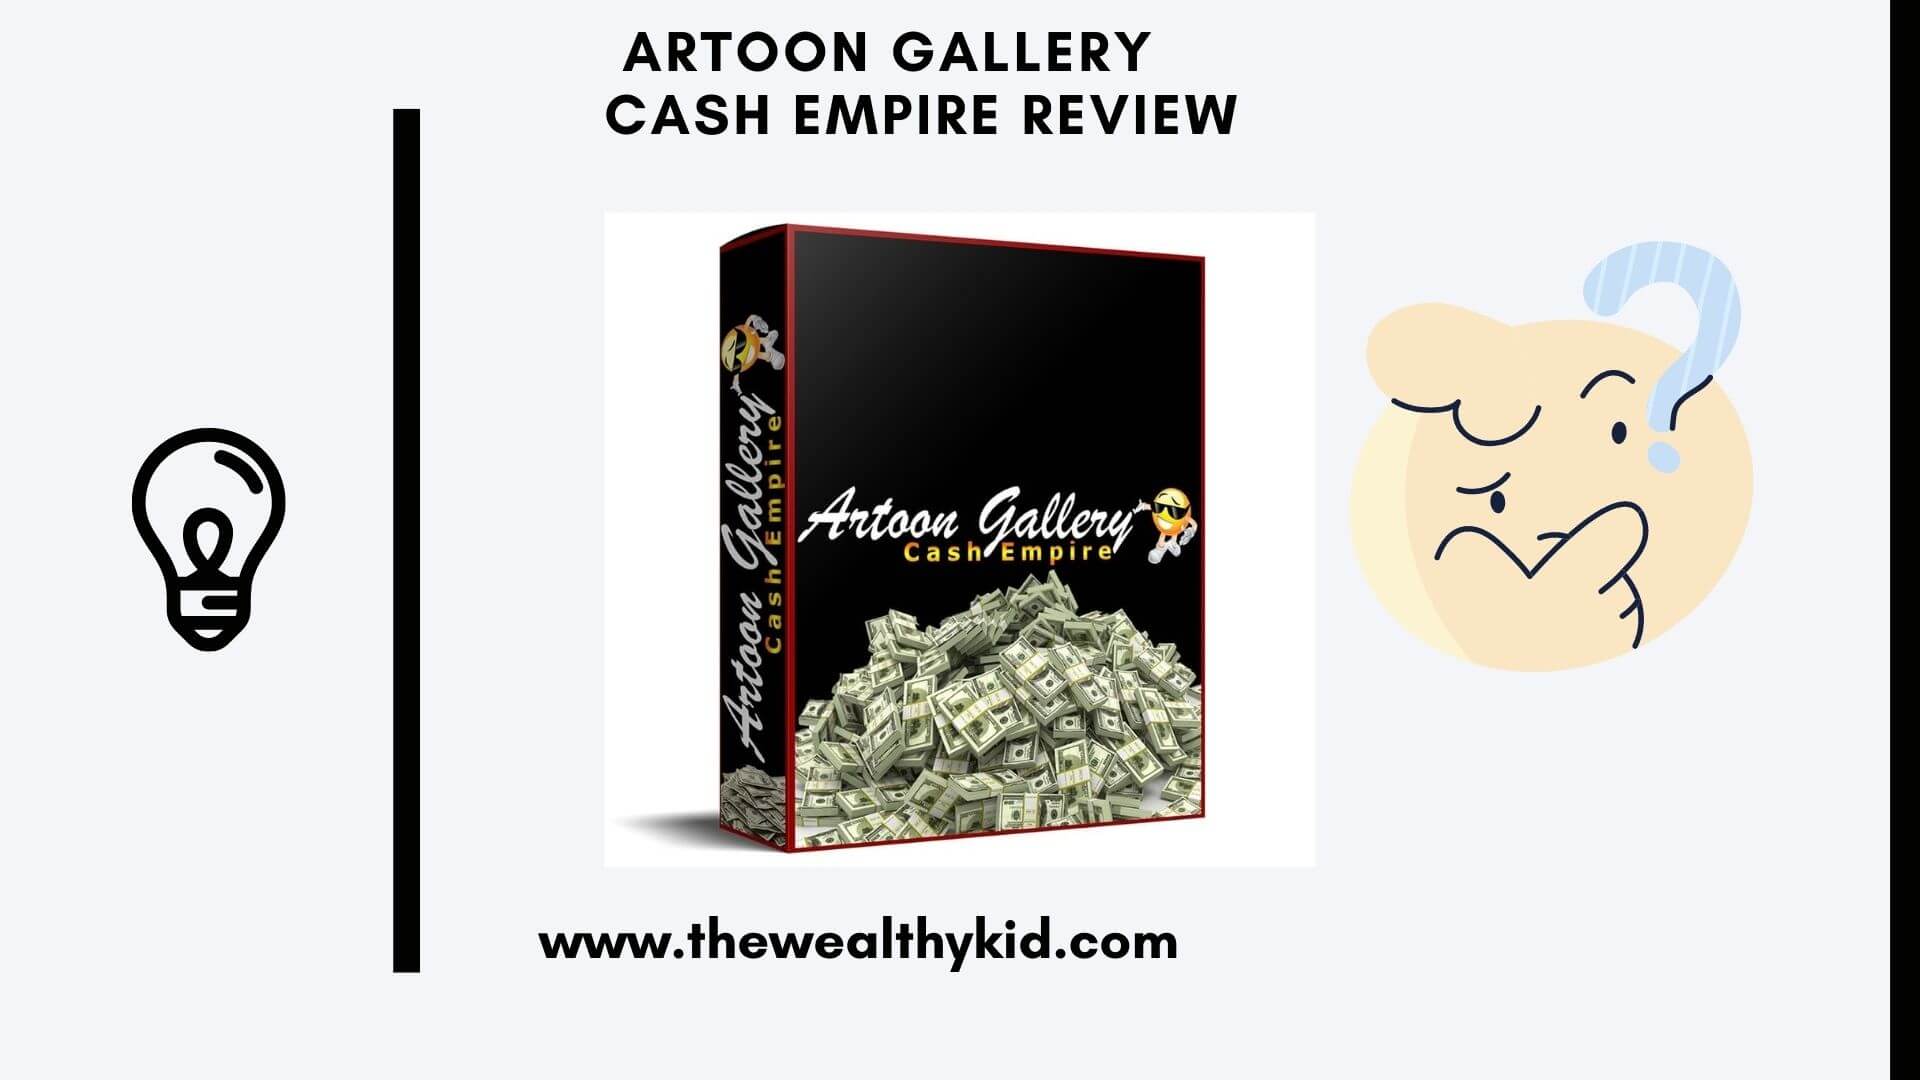 What is Artoon Gallery Cash Empire about